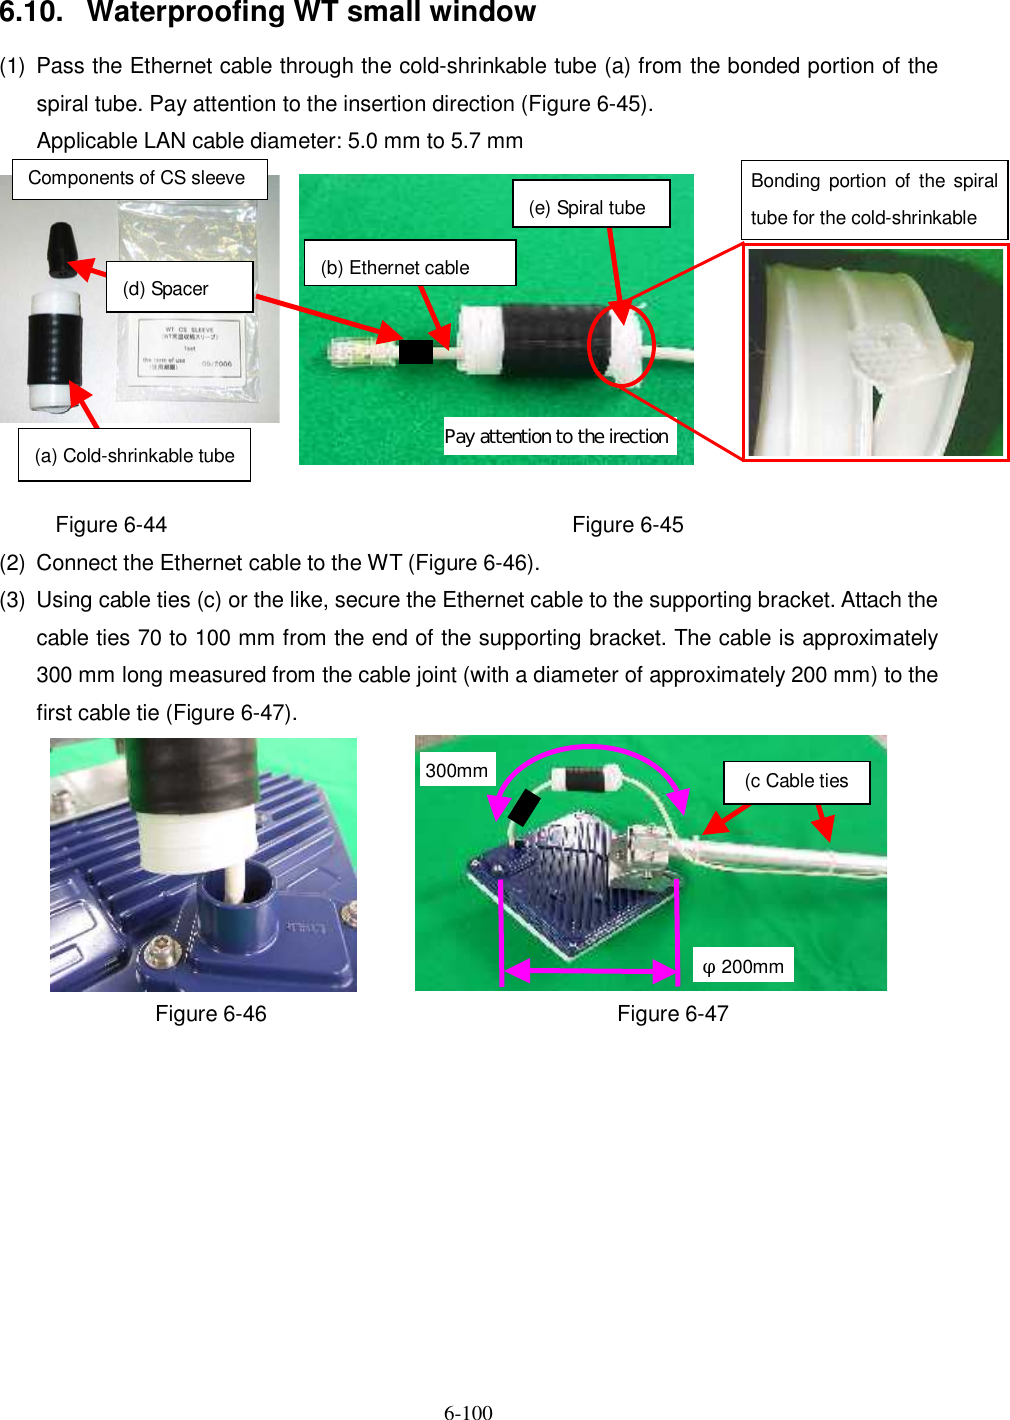   6-100   6.10.  Waterproofing WT small window (1)  Pass the Ethernet cable through the cold-shrinkable tube (a) from the bonded portion of the spiral tube. Pay attention to the insertion direction (Figure 6-45).     Applicable LAN cable diameter: 5.0 mm to 5.7 mm  Figure 6-44 Figure 6-45 (2)  Connect the Ethernet cable to the WT (Figure 6-46). (3)  Using cable ties (c) or the like, secure the Ethernet cable to the supporting bracket. Attach the cable ties 70 to 100 mm from the end of the supporting bracket. The cable is approximately 300 mm long measured from the cable joint (with a diameter of approximately 200 mm) to the first cable tie (Figure 6-47).    Figure 6-46  Figure 6-47 (d) Spacer (a) Cold-shrinkable tube Pay attention to the irection (b) Ethernet cable Bonding  portion  of  the spiral tube for the cold-shrinkable Components of CS sleeve (e) Spiral tube (c Cable ties φ200mm 300mm 